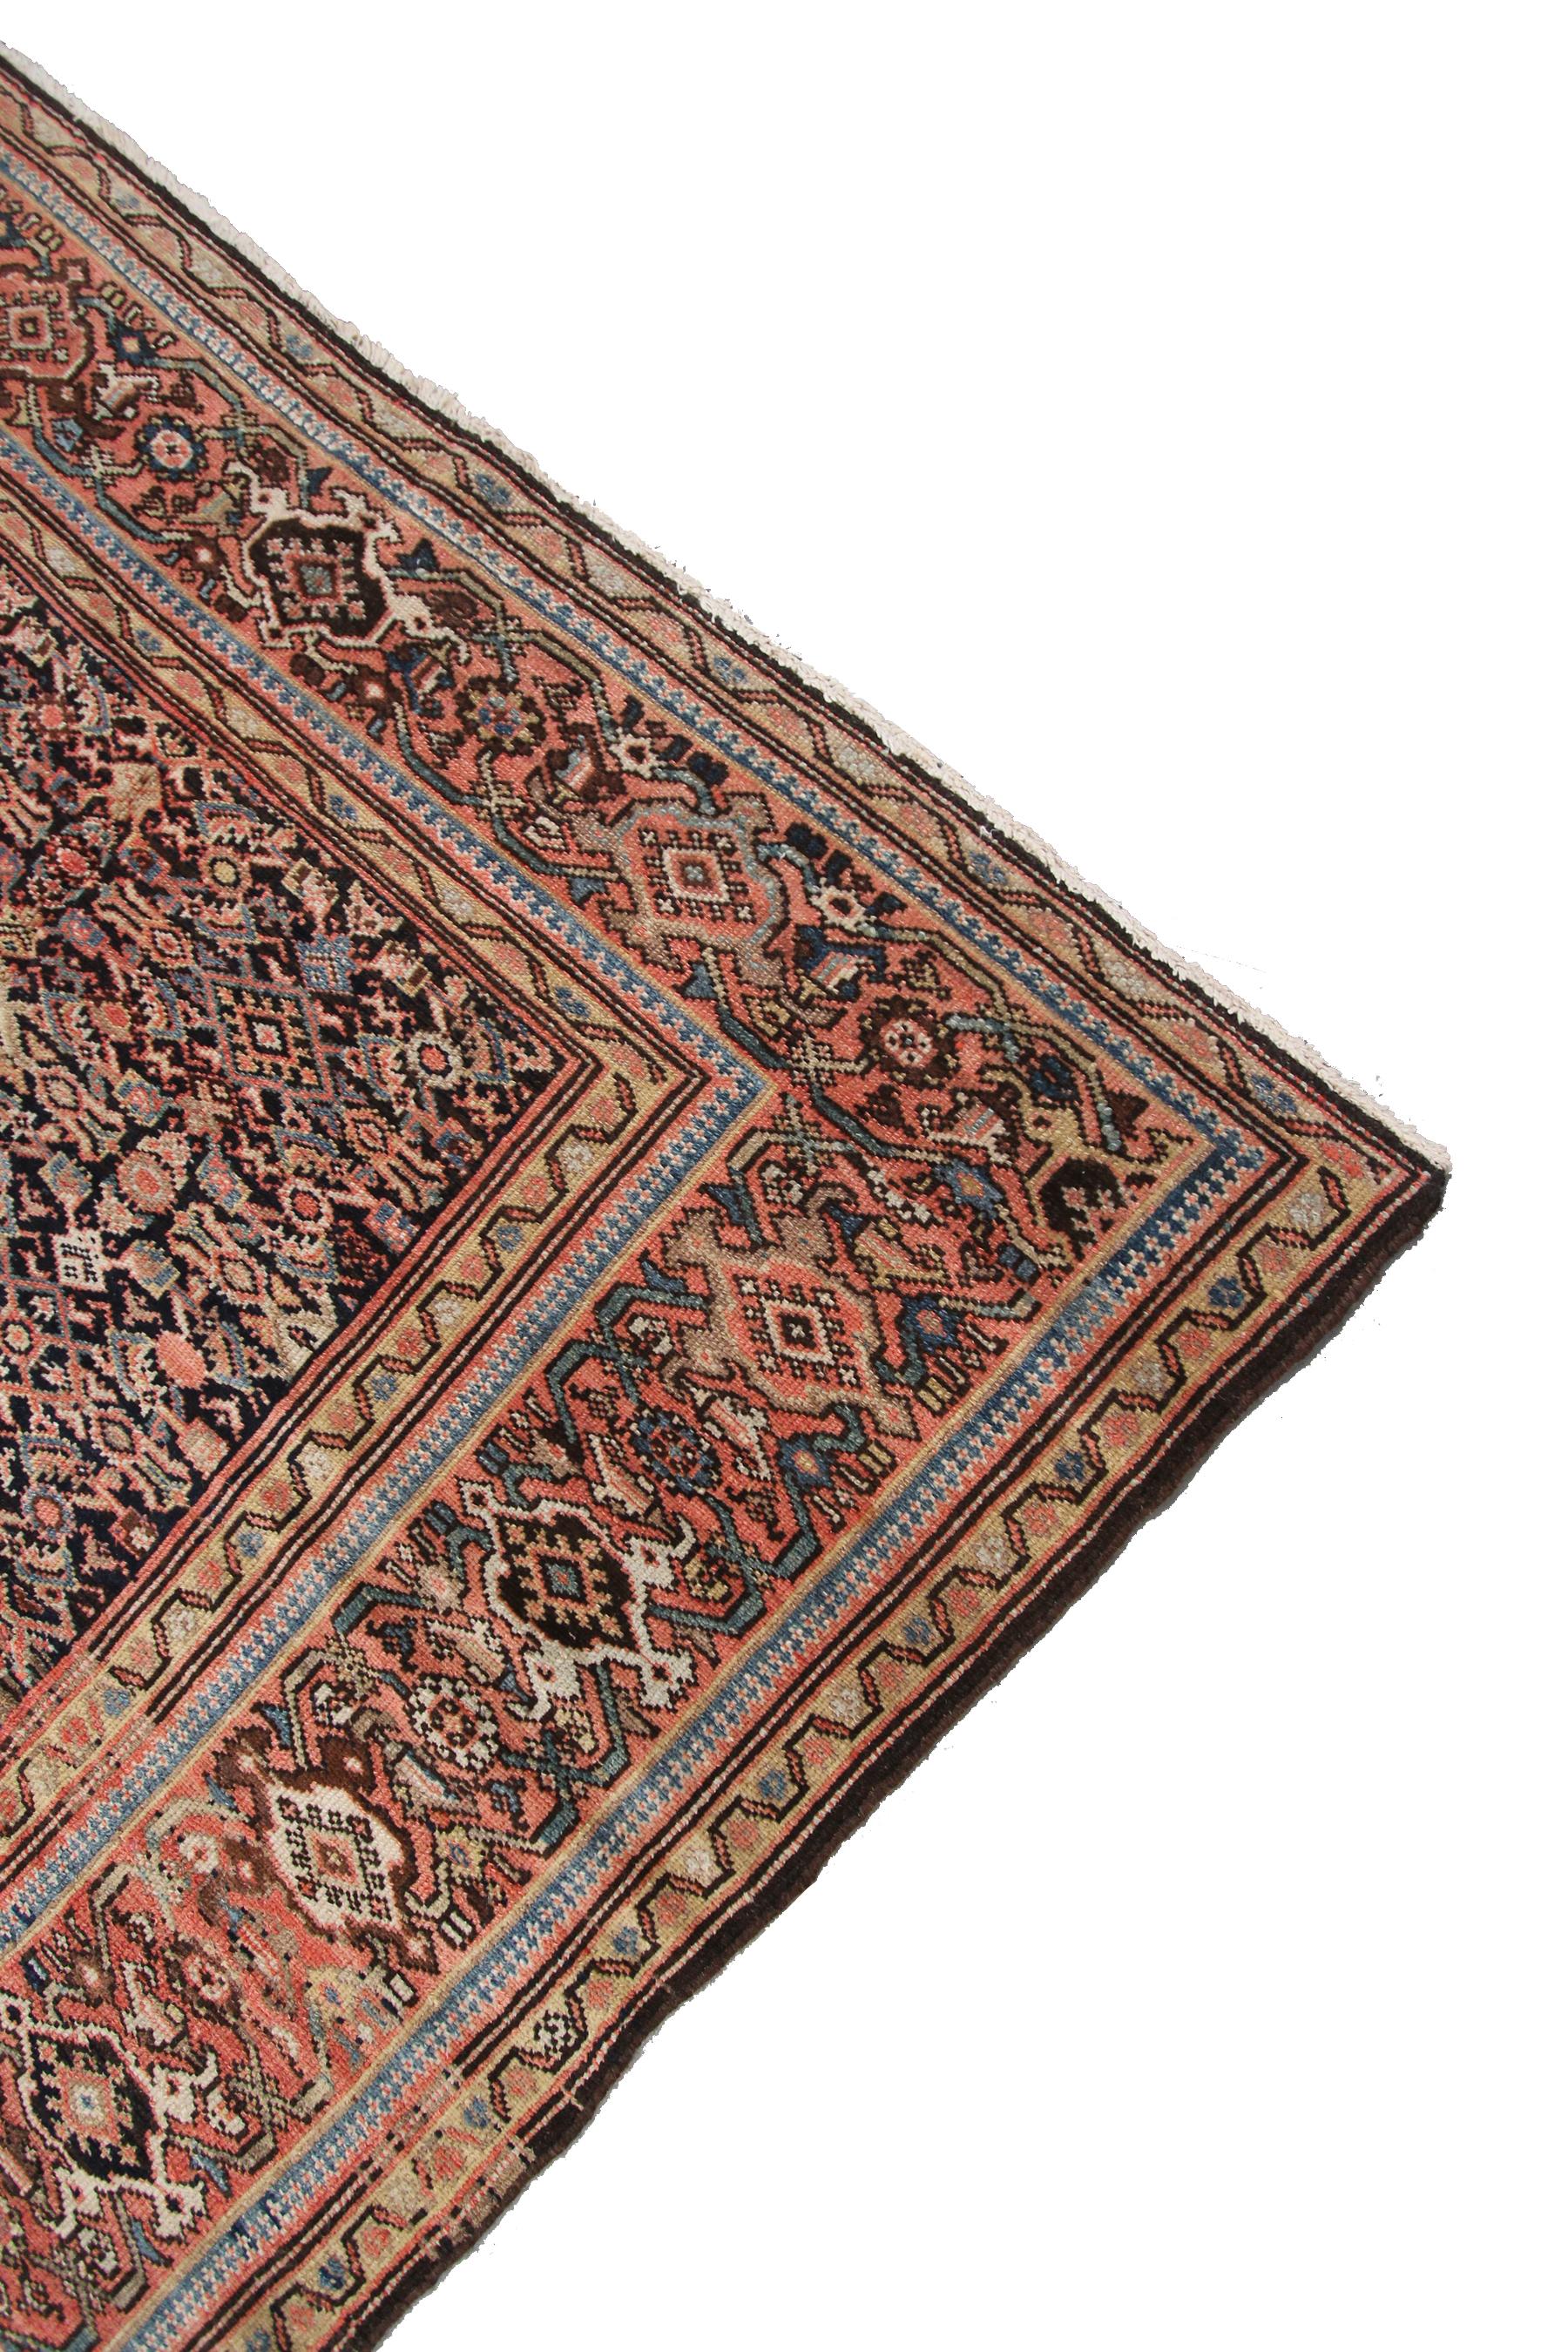 1900 Antique Persian Farahan Rug Antique Farahan Rug Geometric Overall In Good Condition For Sale In New York, NY